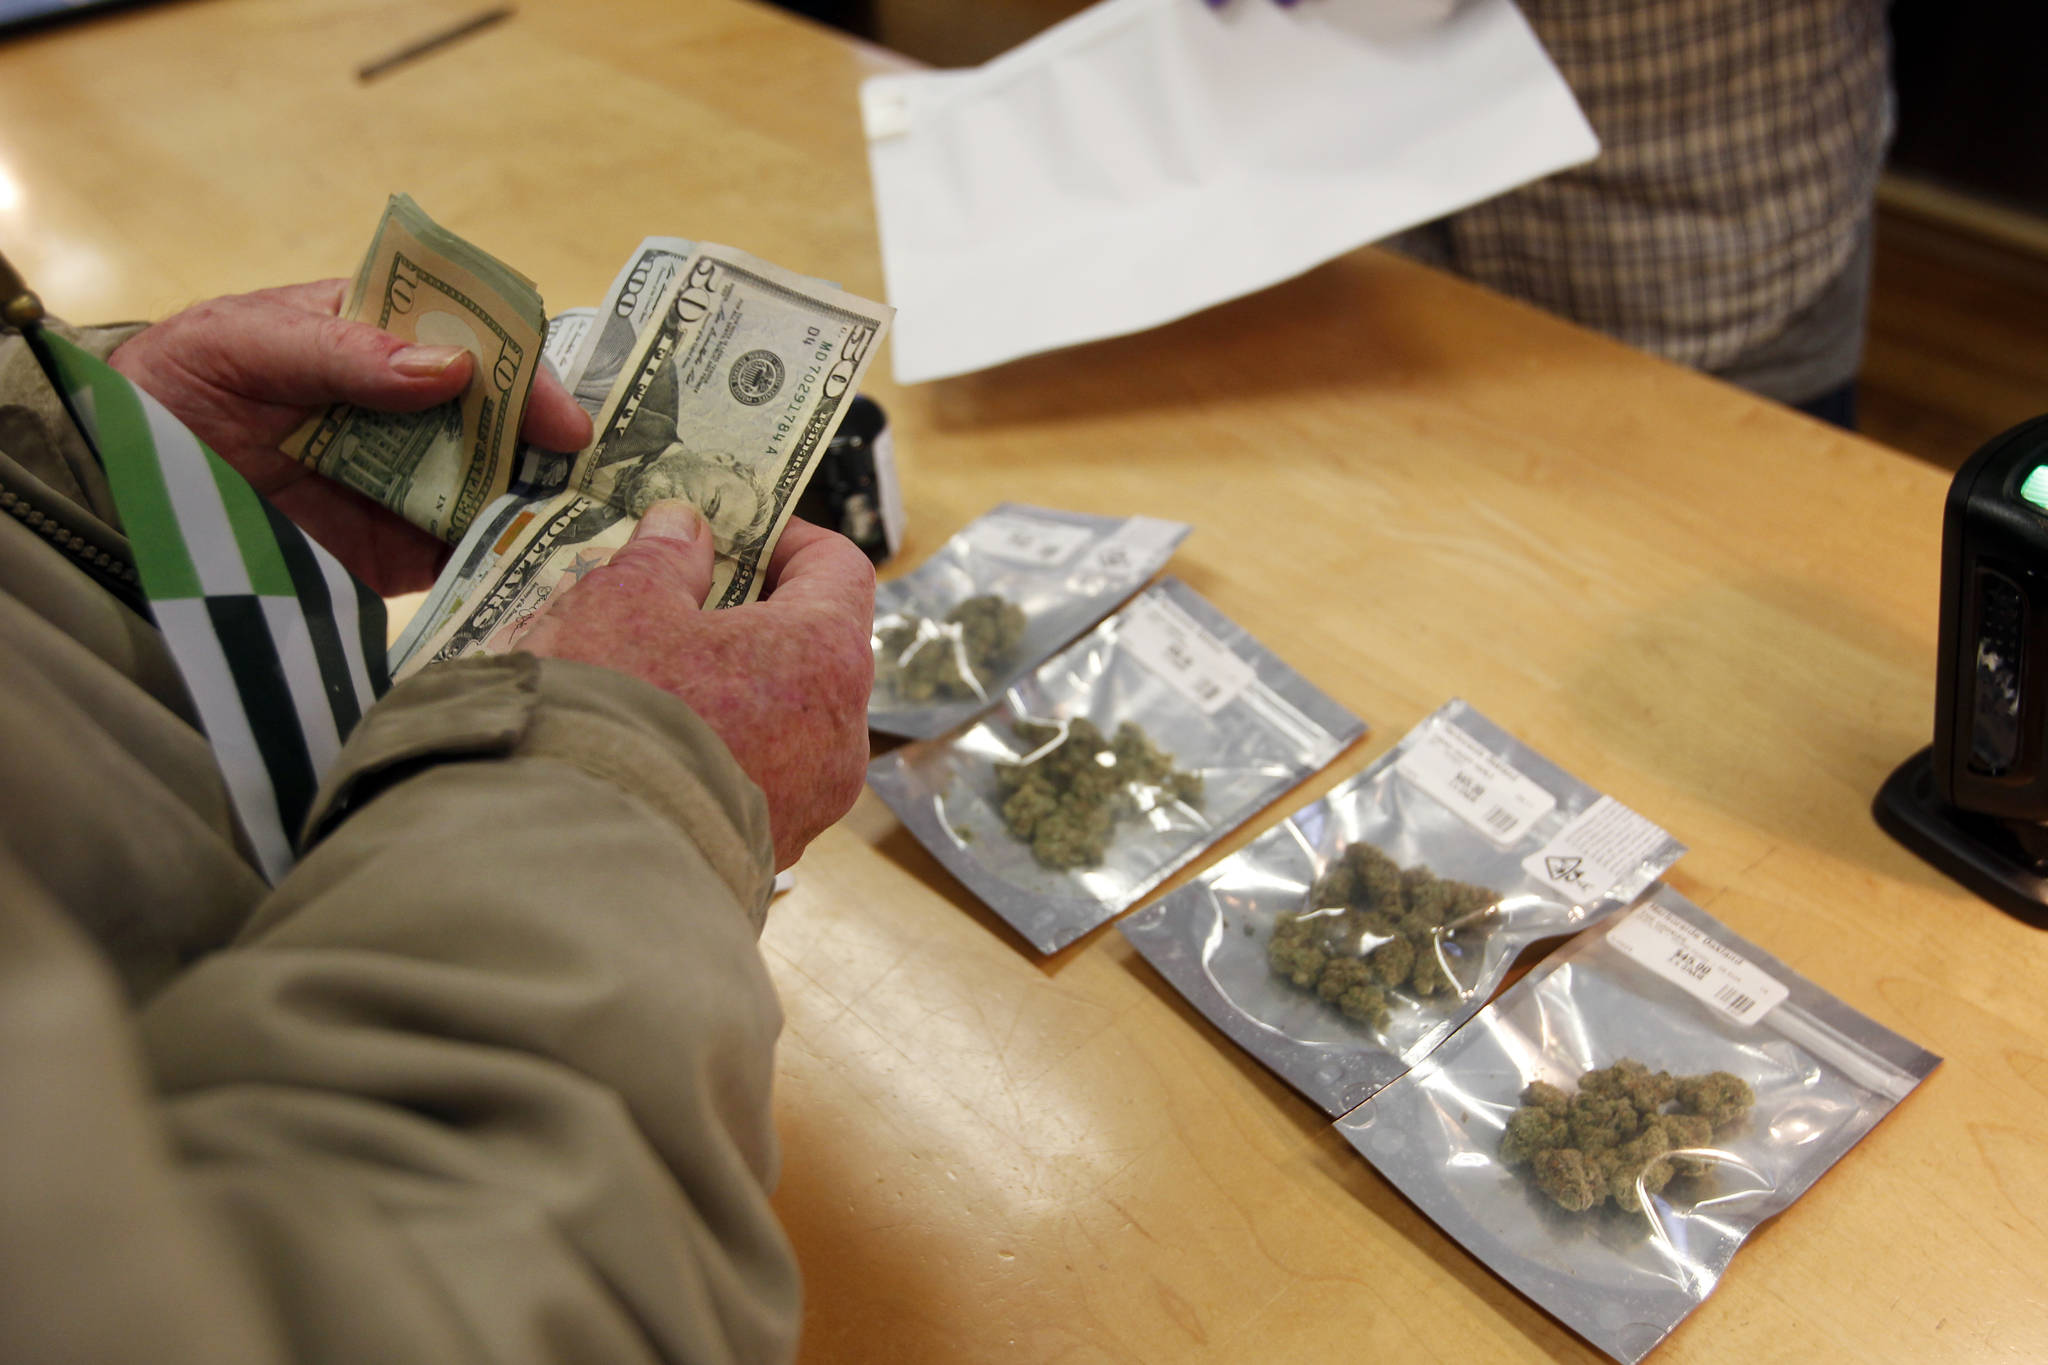 In this Jan. 1, 2018 file photo, a customer purchases marijuana at the Harborside marijuana dispensary in Oakland, Calif., on the first day that recreational marijuana was sold legally in California. In January 2018, Attorney General Jeff Sessions rescinded a 2013 Obama Administration policy pledging that federal authorities would not crack down on marijuana operations in states where they were legal as long as the states maintained tight regulations. (AP Photo/Mathew Sumner)